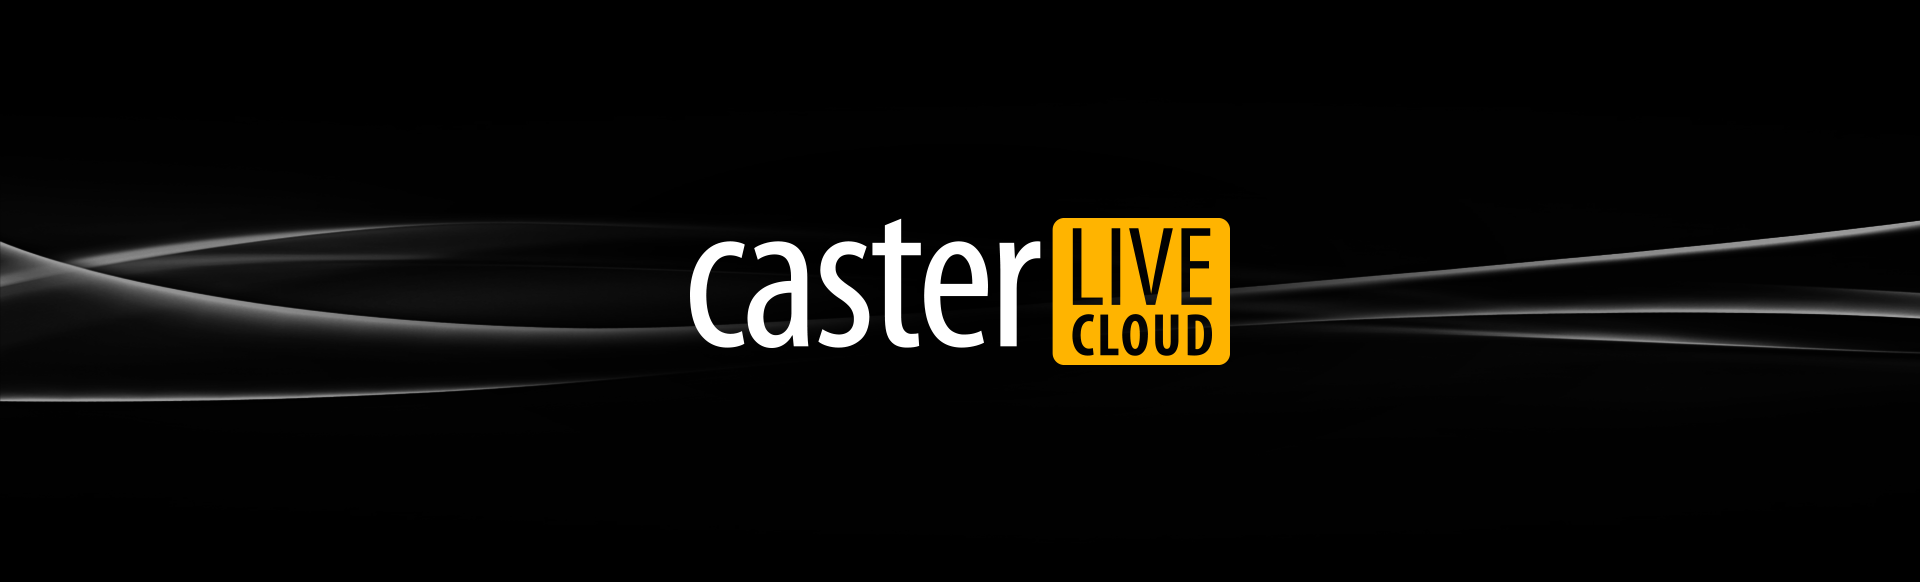 casterlivecloud-guide-banner